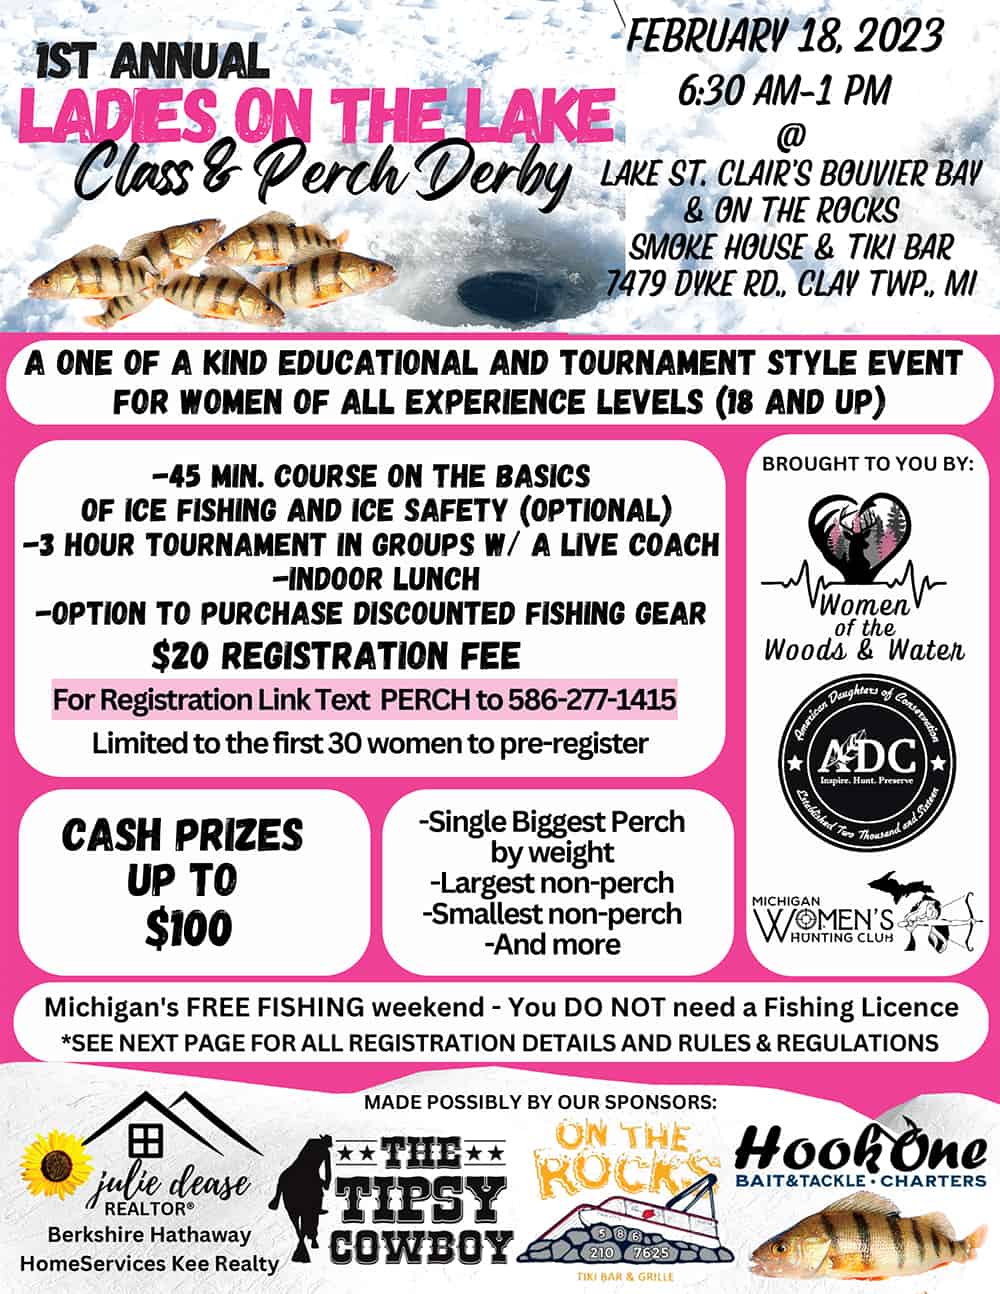 1st Annual Ladies on the Lake St. Clair Ice Fishing Derby Information